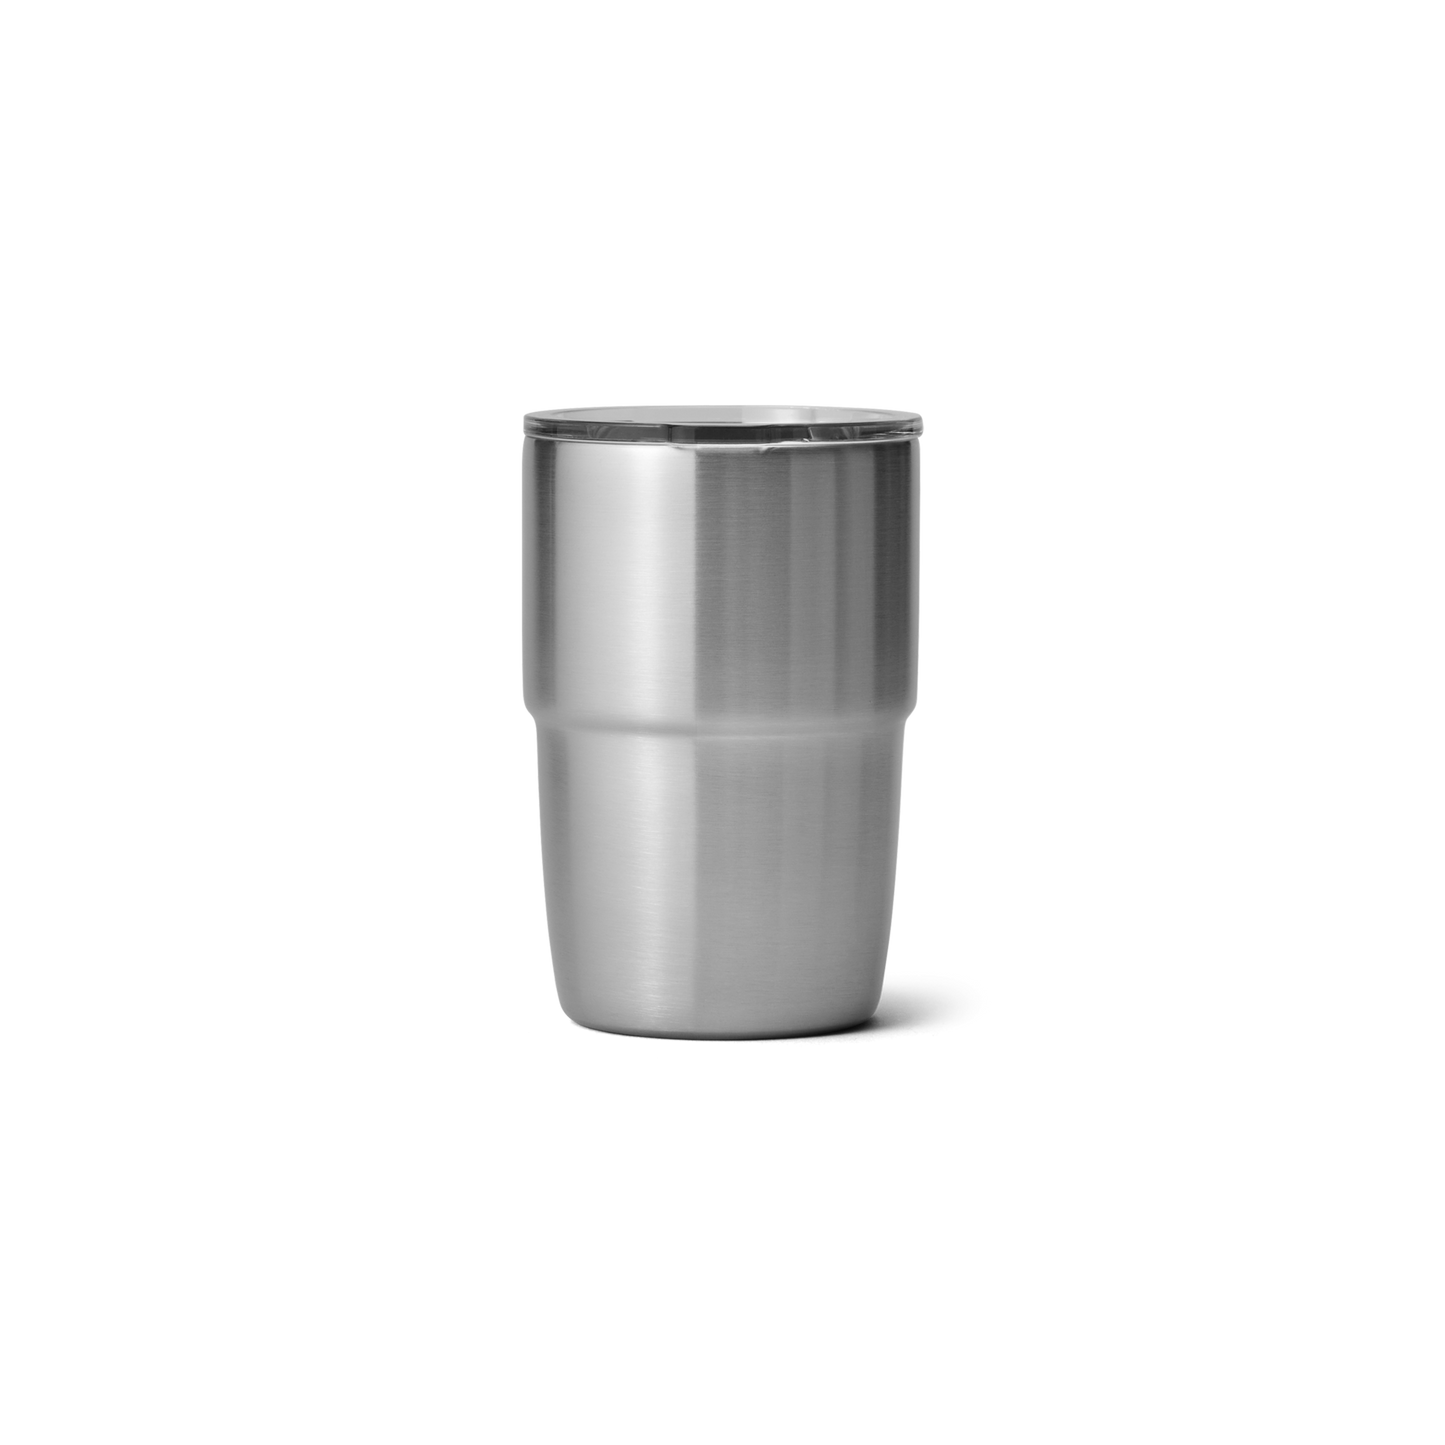  YETI Rambler 8 oz Stackable Cup, Stainless Steel